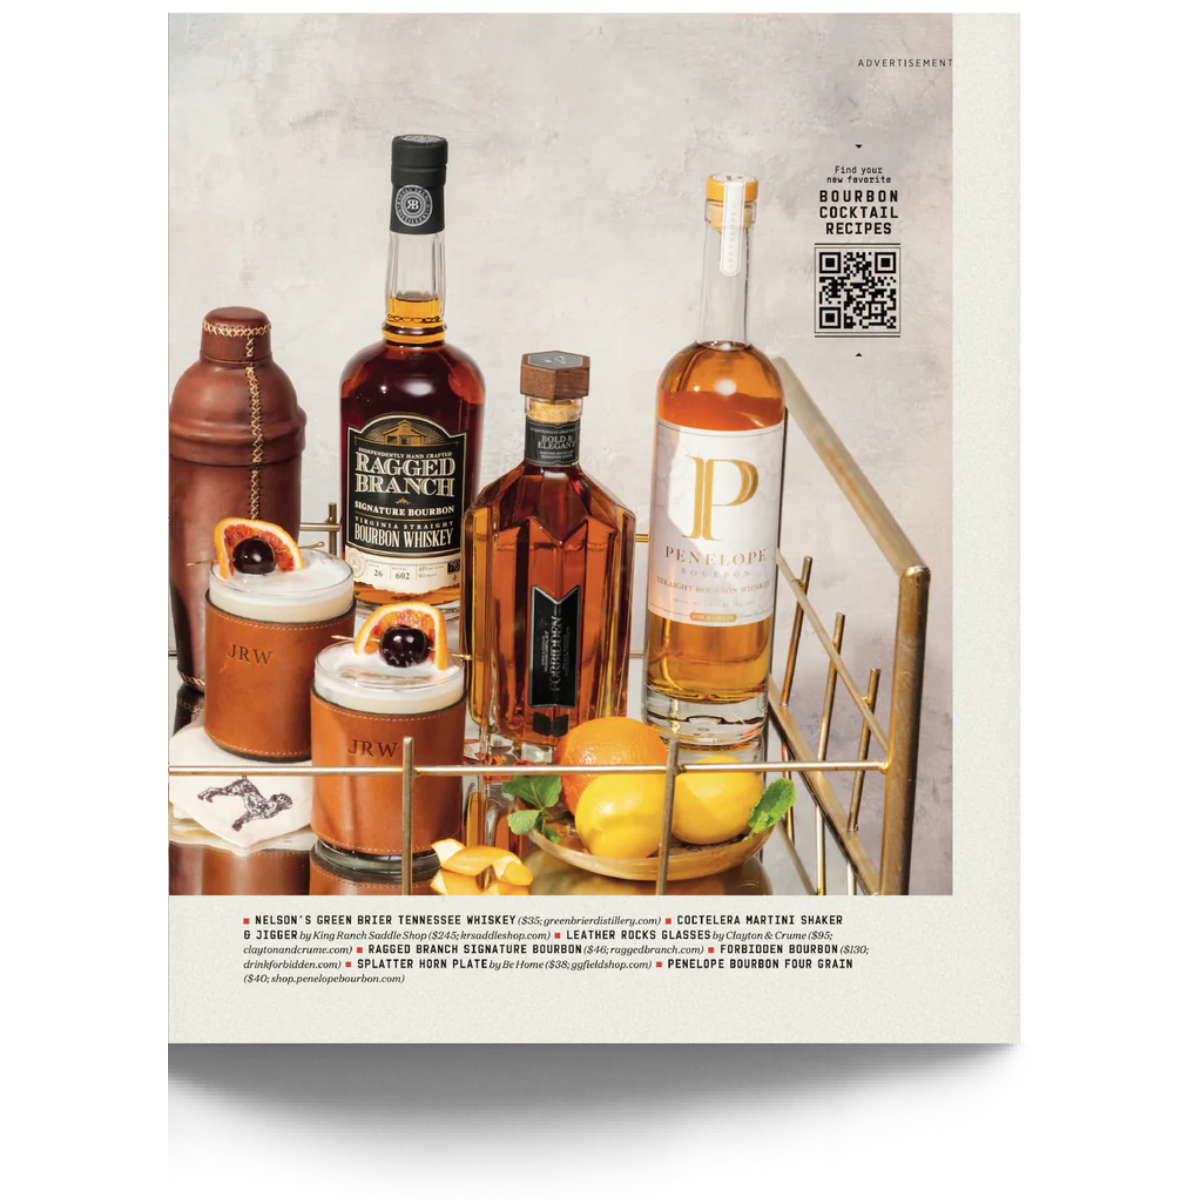  A magazine page clipping featuring a stocked bar cart with a variety of spirits and bar accessories.